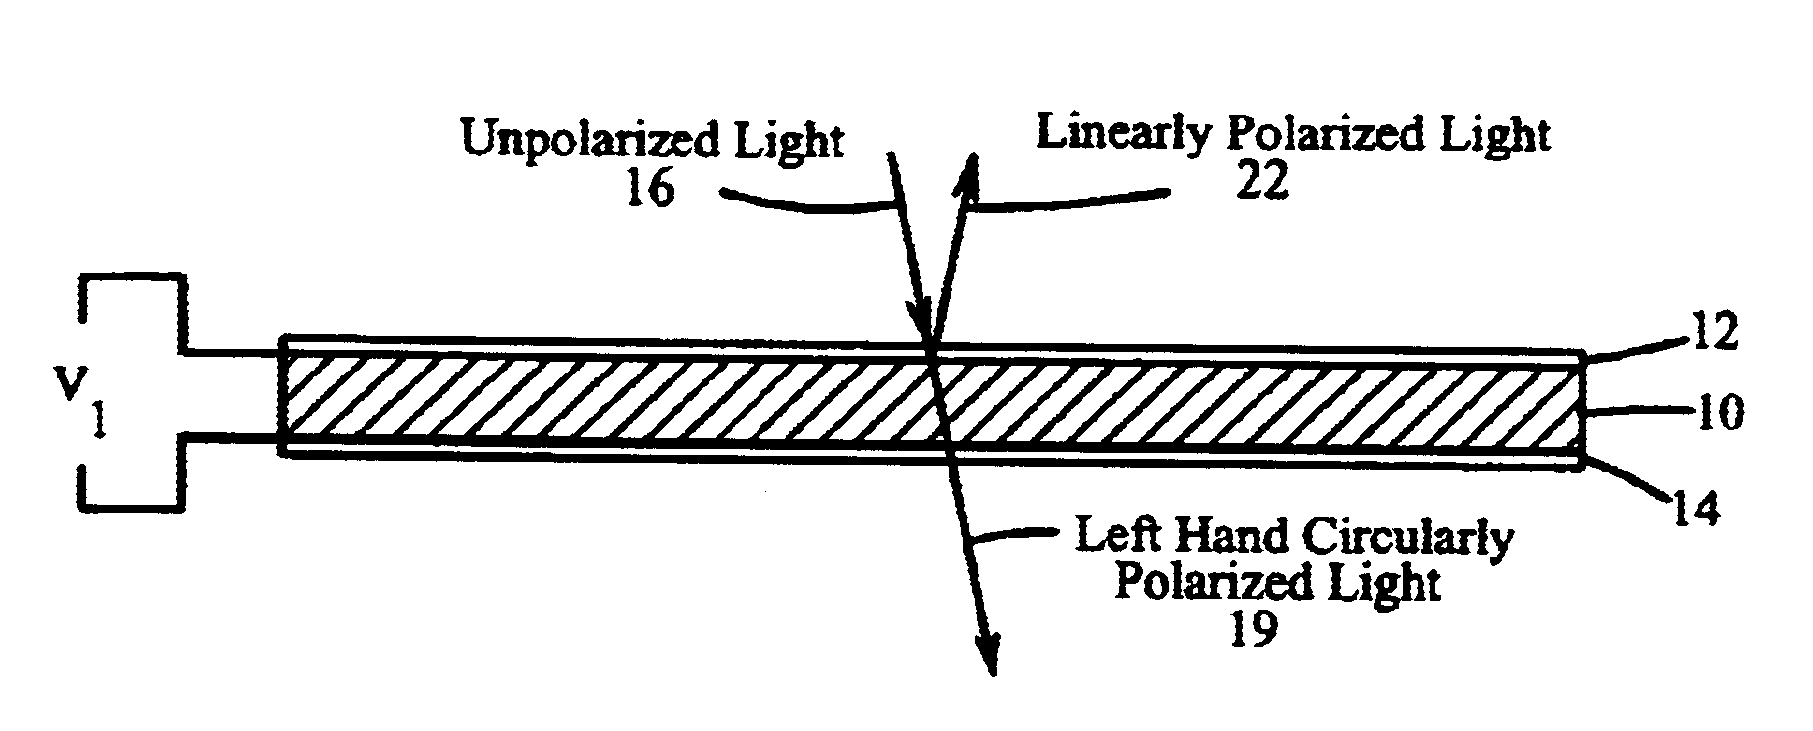 Spectrum-controllable reflective polarizers having electrically-switchable modes of operation